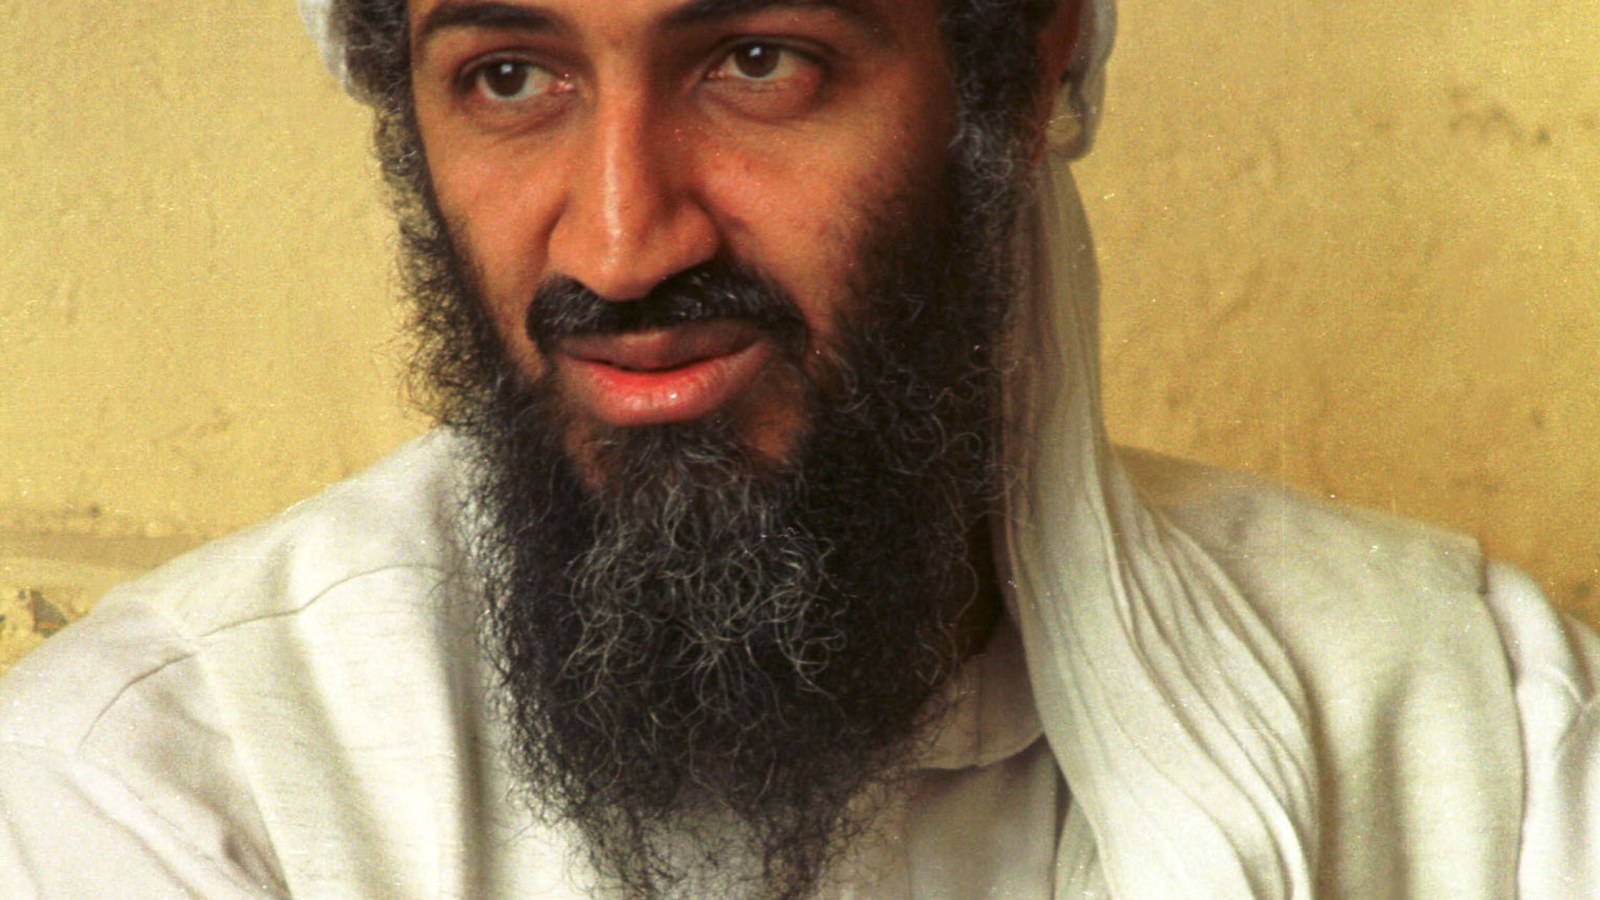 Osama bin Laden's Alleged Bodyguard Released From Detainment in Tunisia